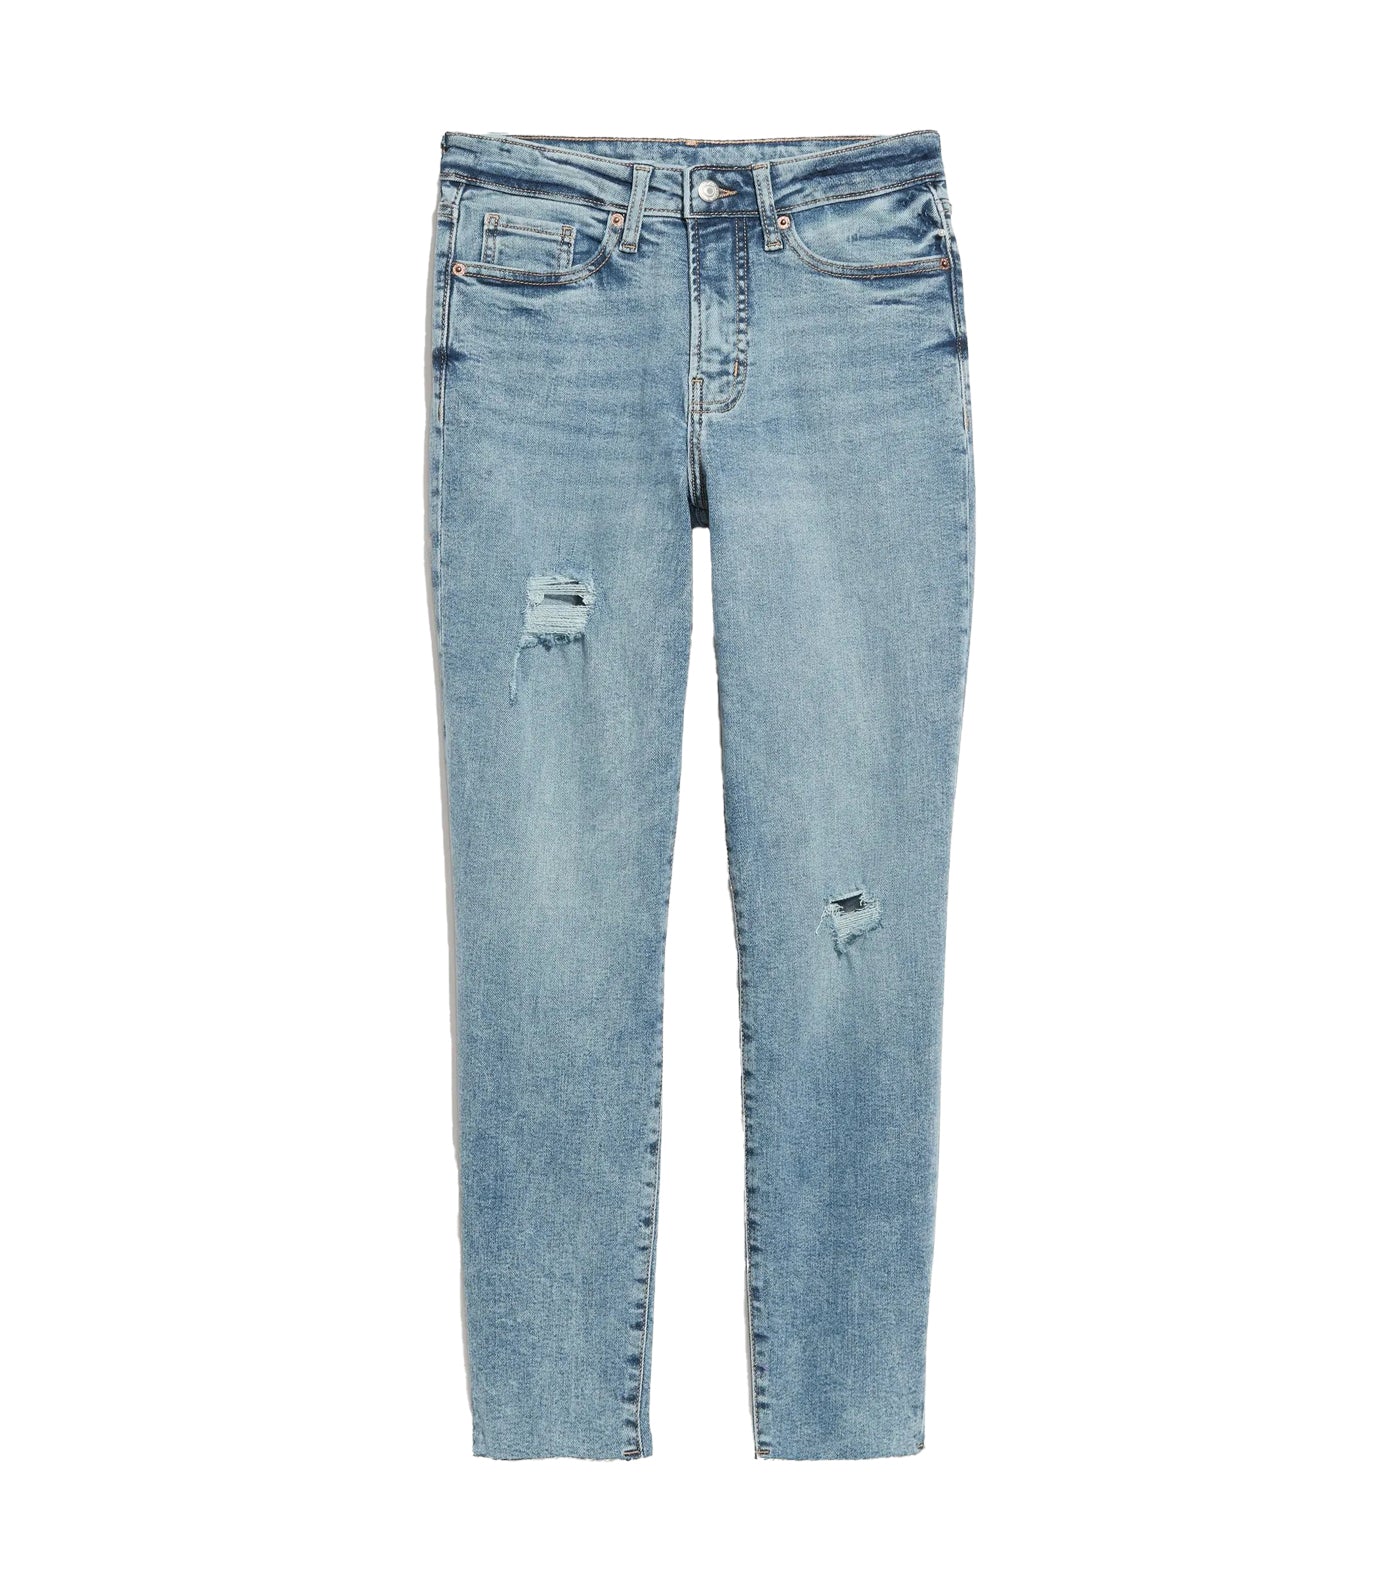 High-Waisted O.G. Straight Ripped Cut-Off Ankle Jeans for Women Cora